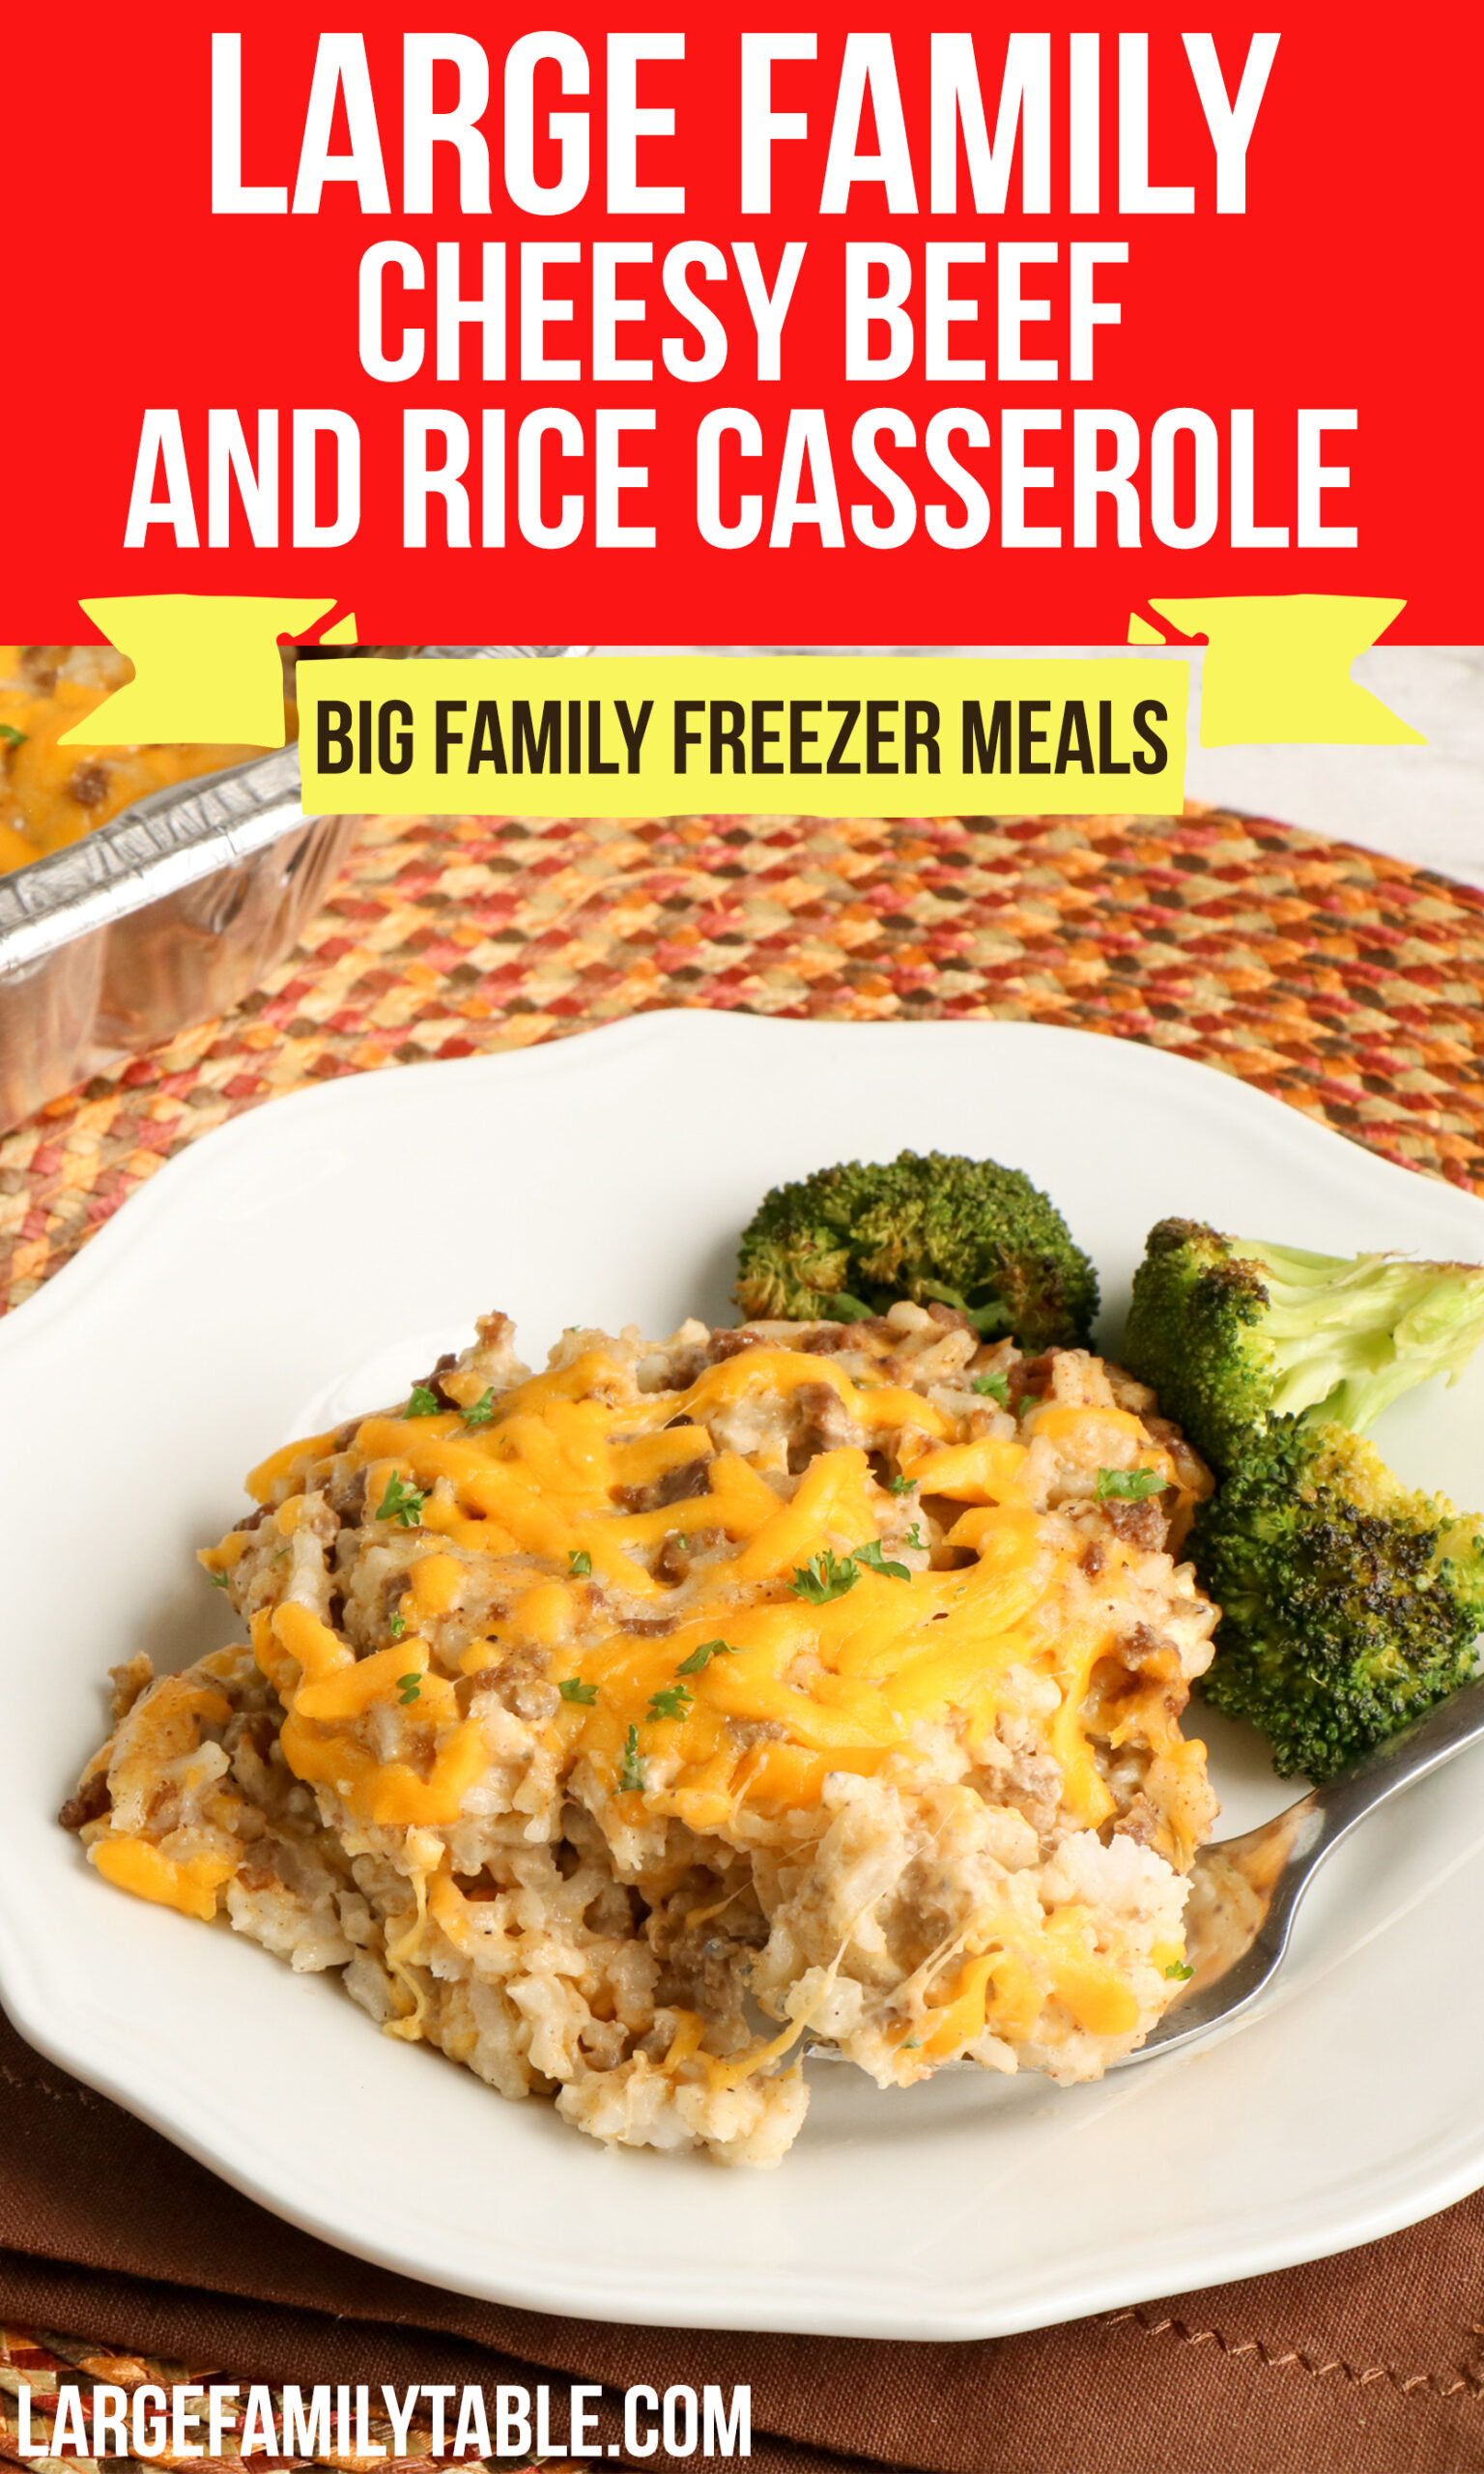 Large Family Cheesy Beef and Rice Casserole